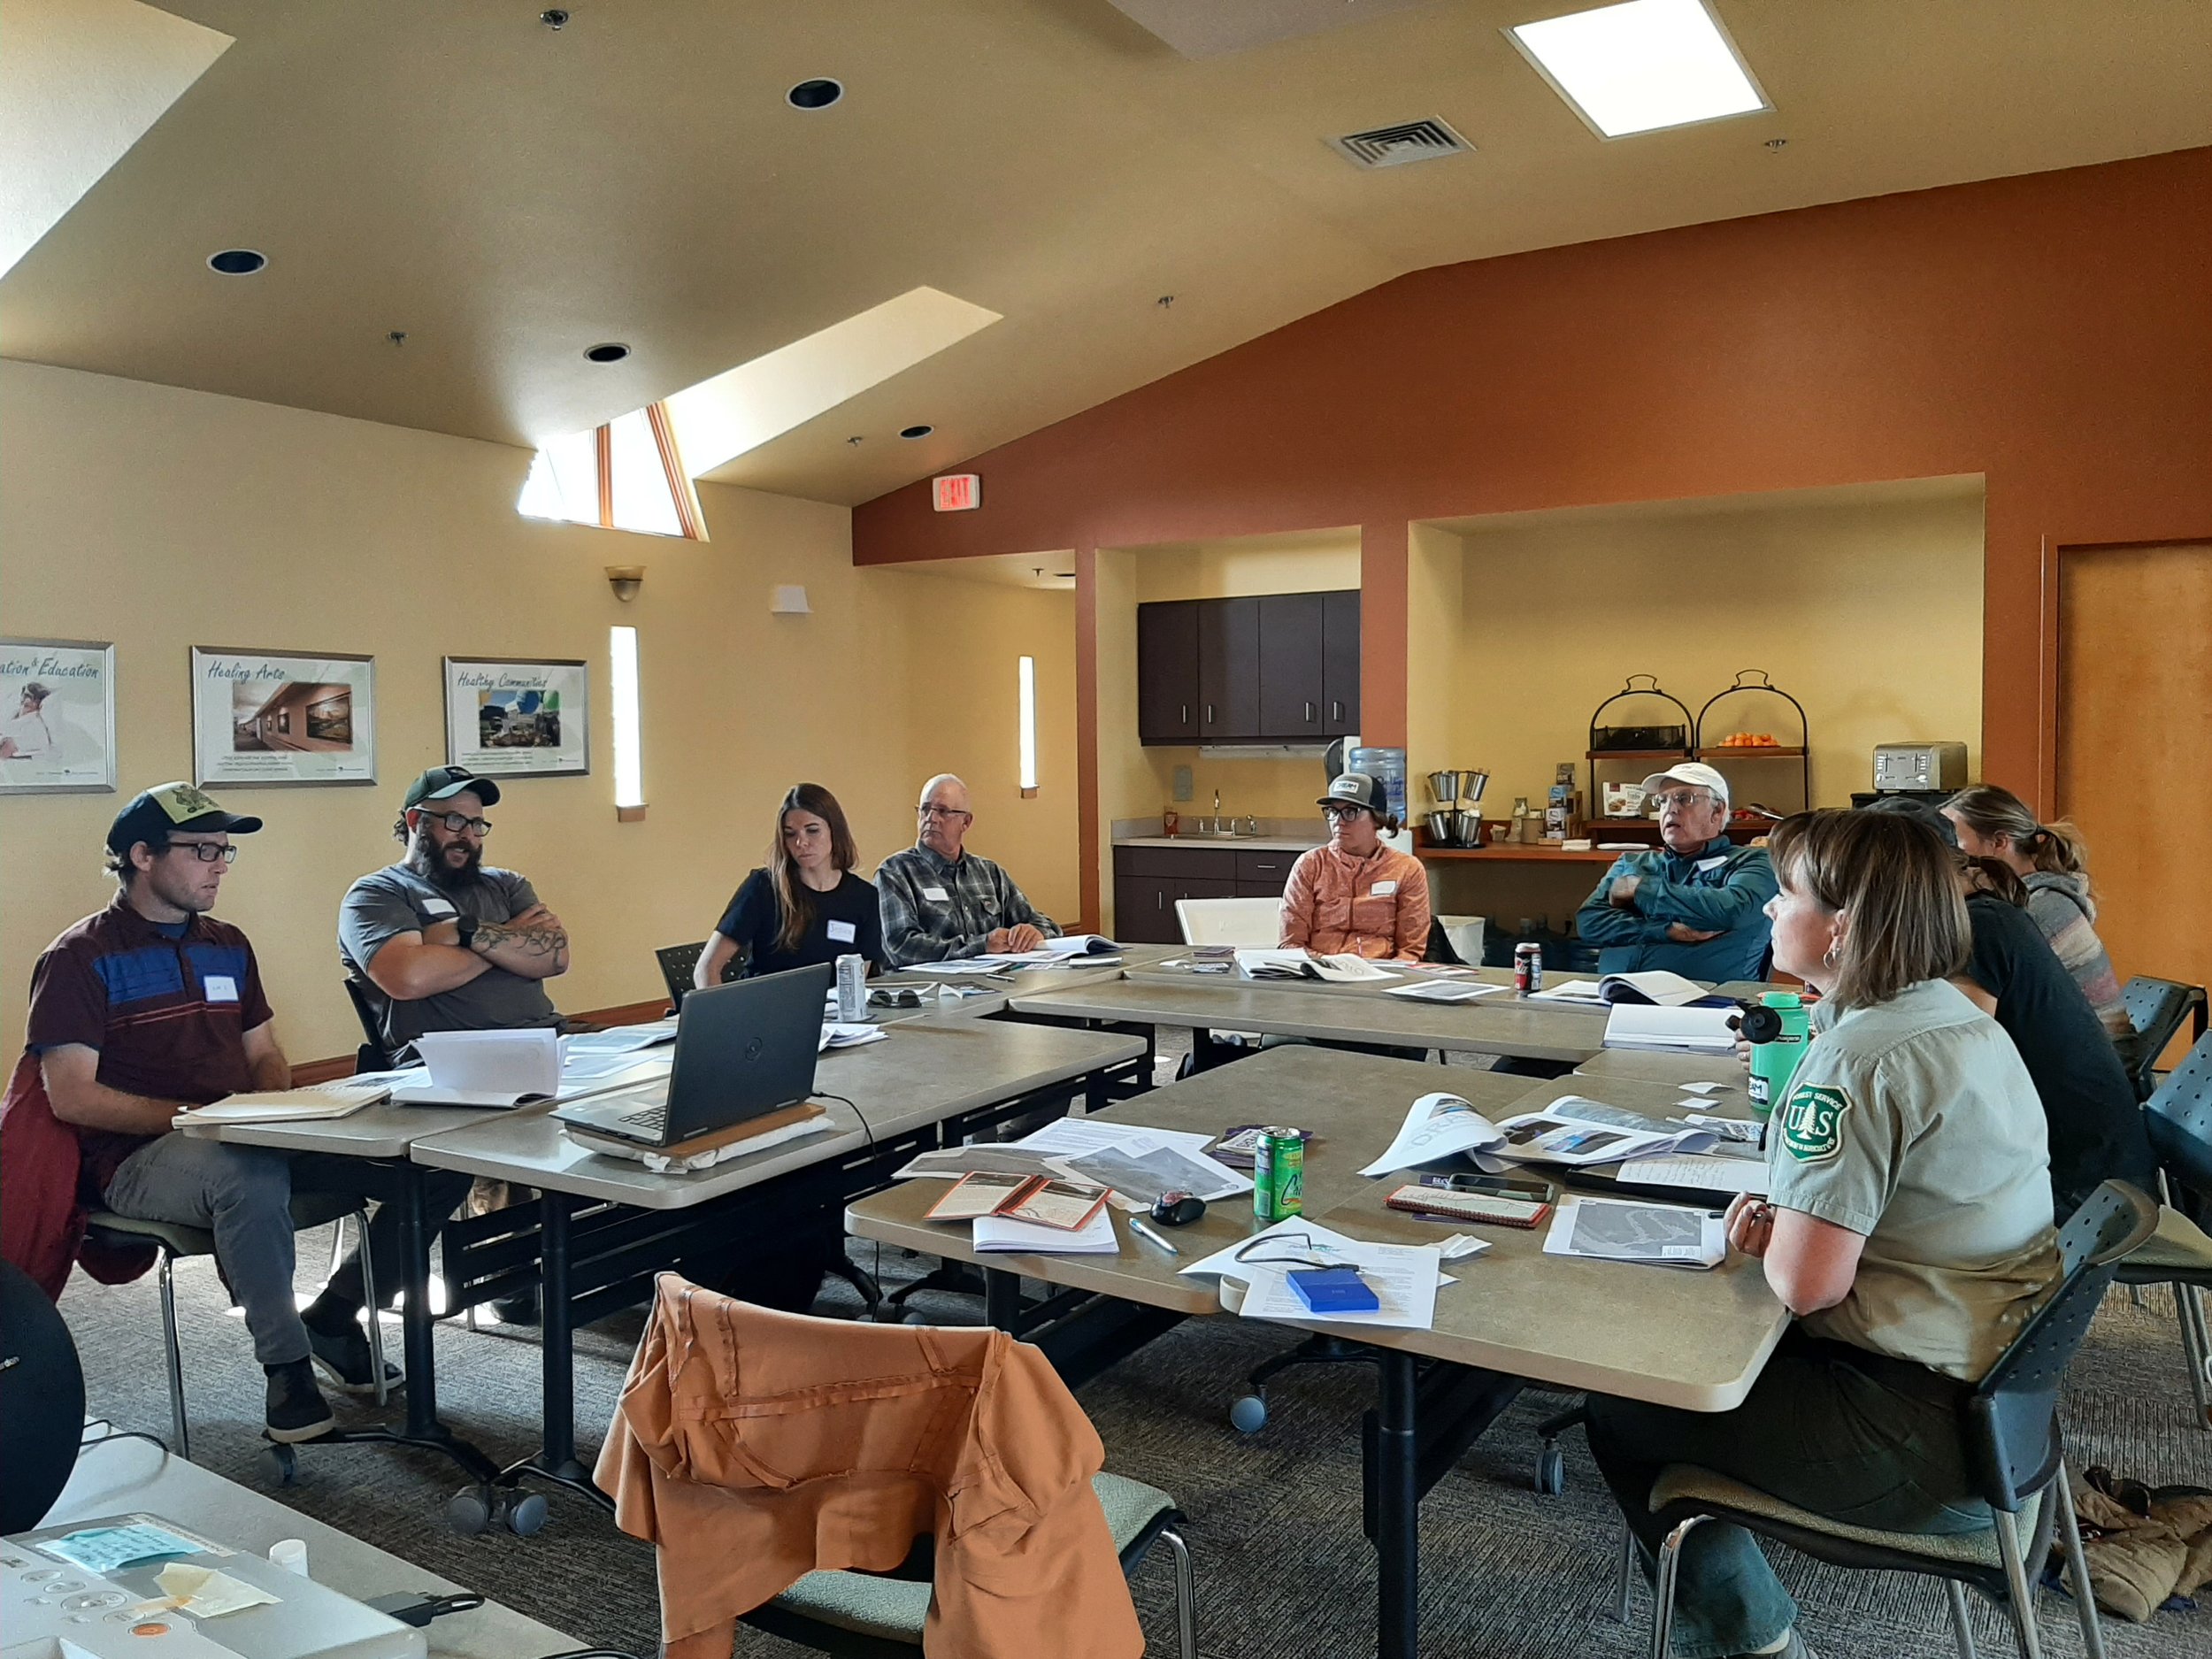  Representatives from Flathead Rivers Alliance, Glacier National Park, Flathead National Forest, DREAM Adaptive, Summit Independent Living, Hydrologistics, North Valley Search &amp; Rescue, Underwater Soldiers, Wild River Adventures, Montana Raft Co,